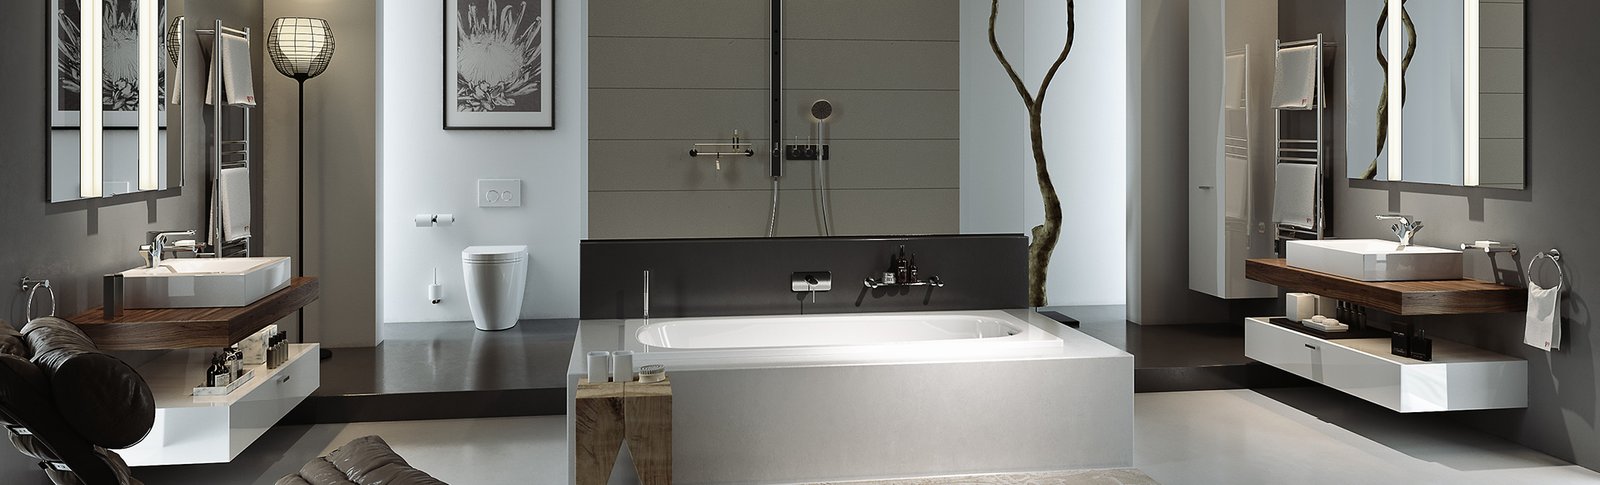 Bathroom Butler bathroom accessories and heated towel rails from stainless steel